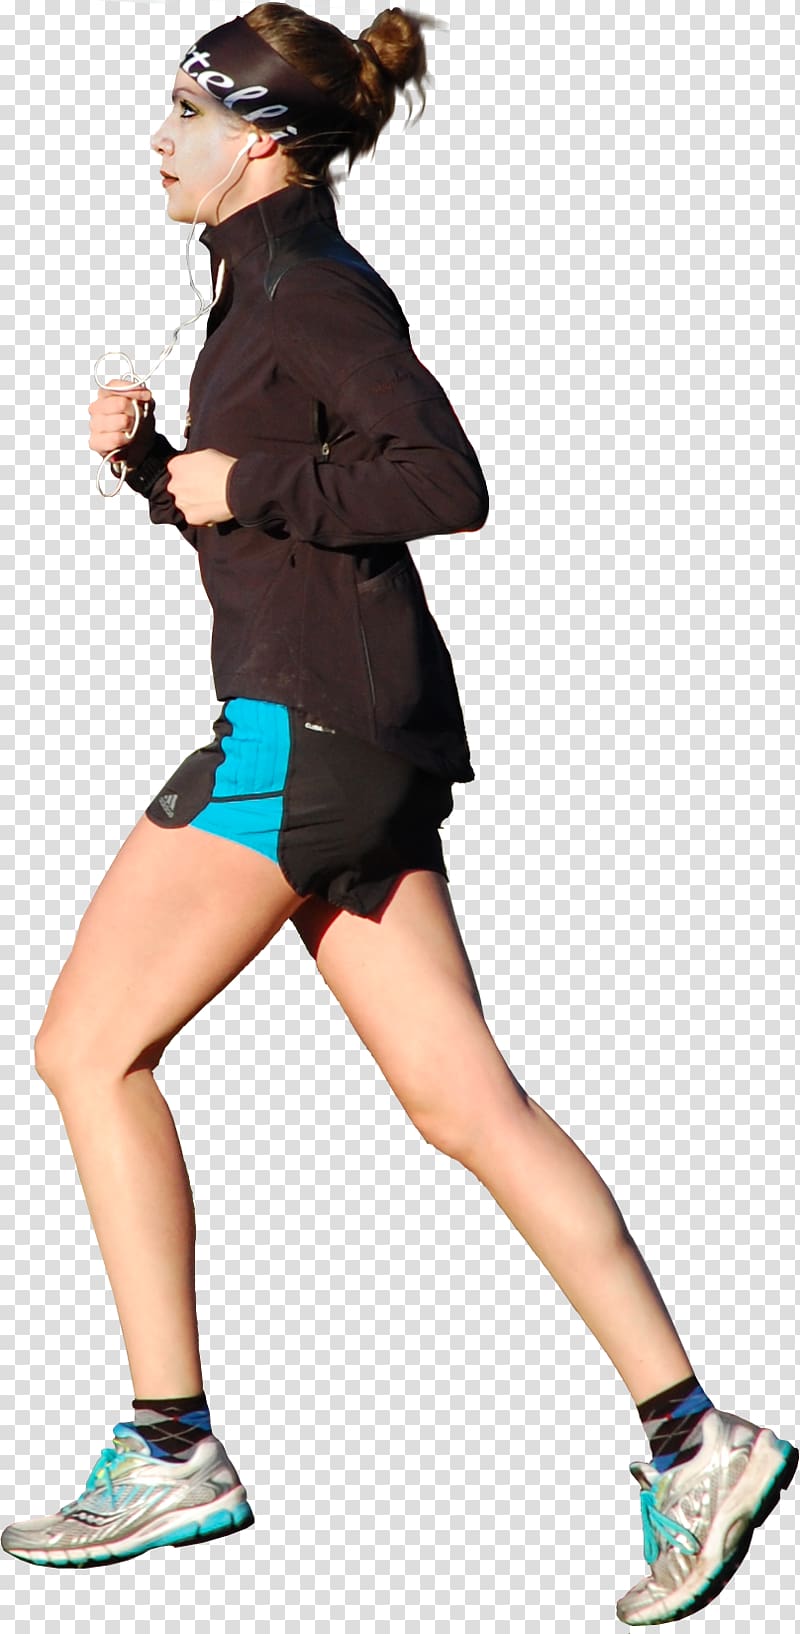 Woman Running, jogging transparent background PNG clipart